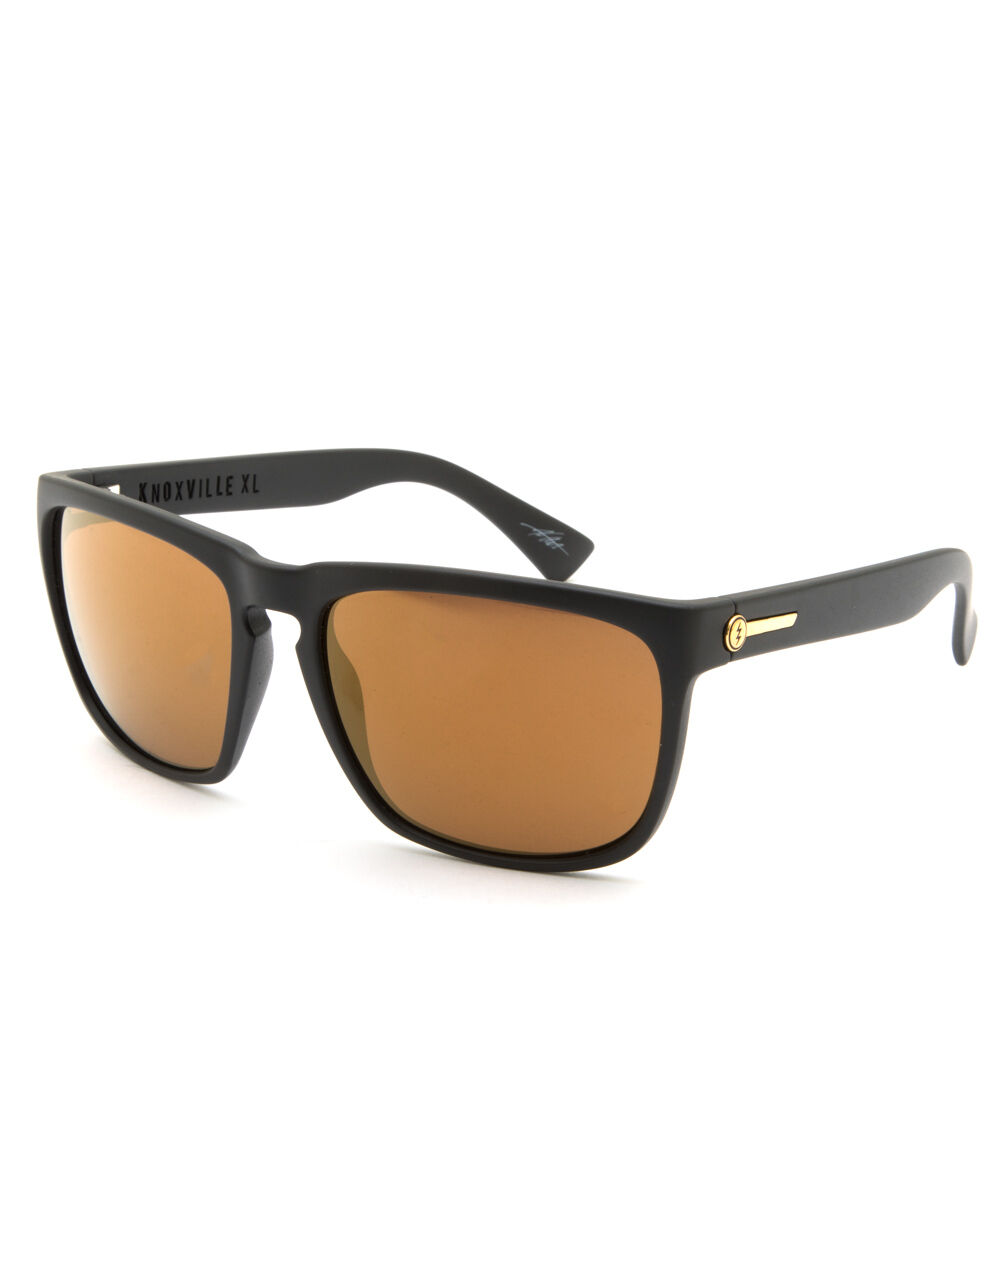 ELECTRIC Knoxville XL Sunglasses Matte Black Sunglasses image number 0